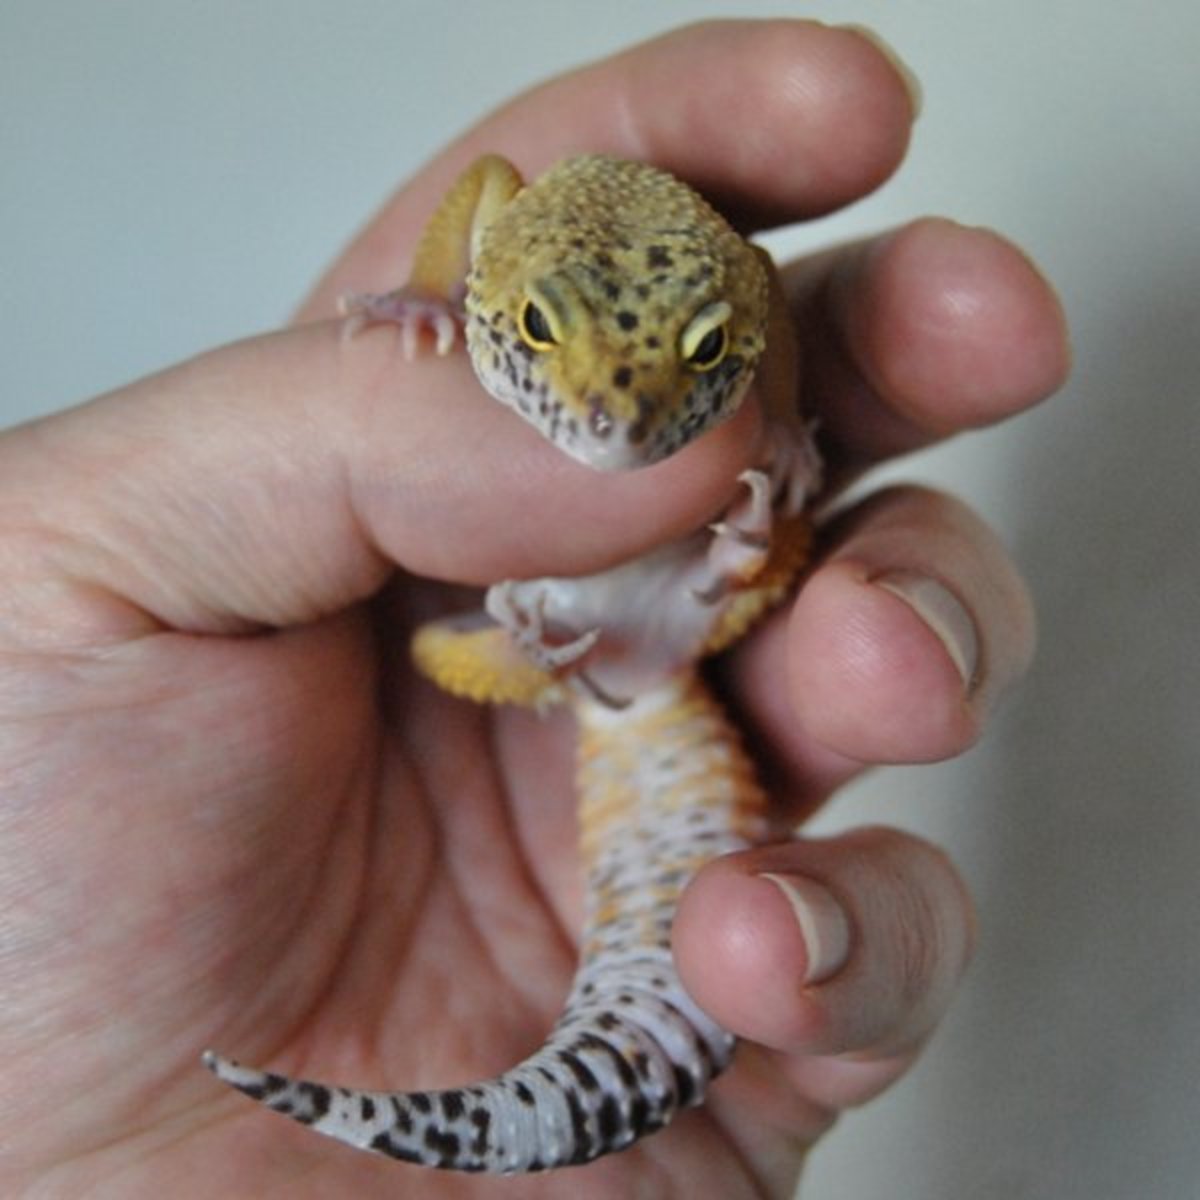 African Fat Tail Gecko